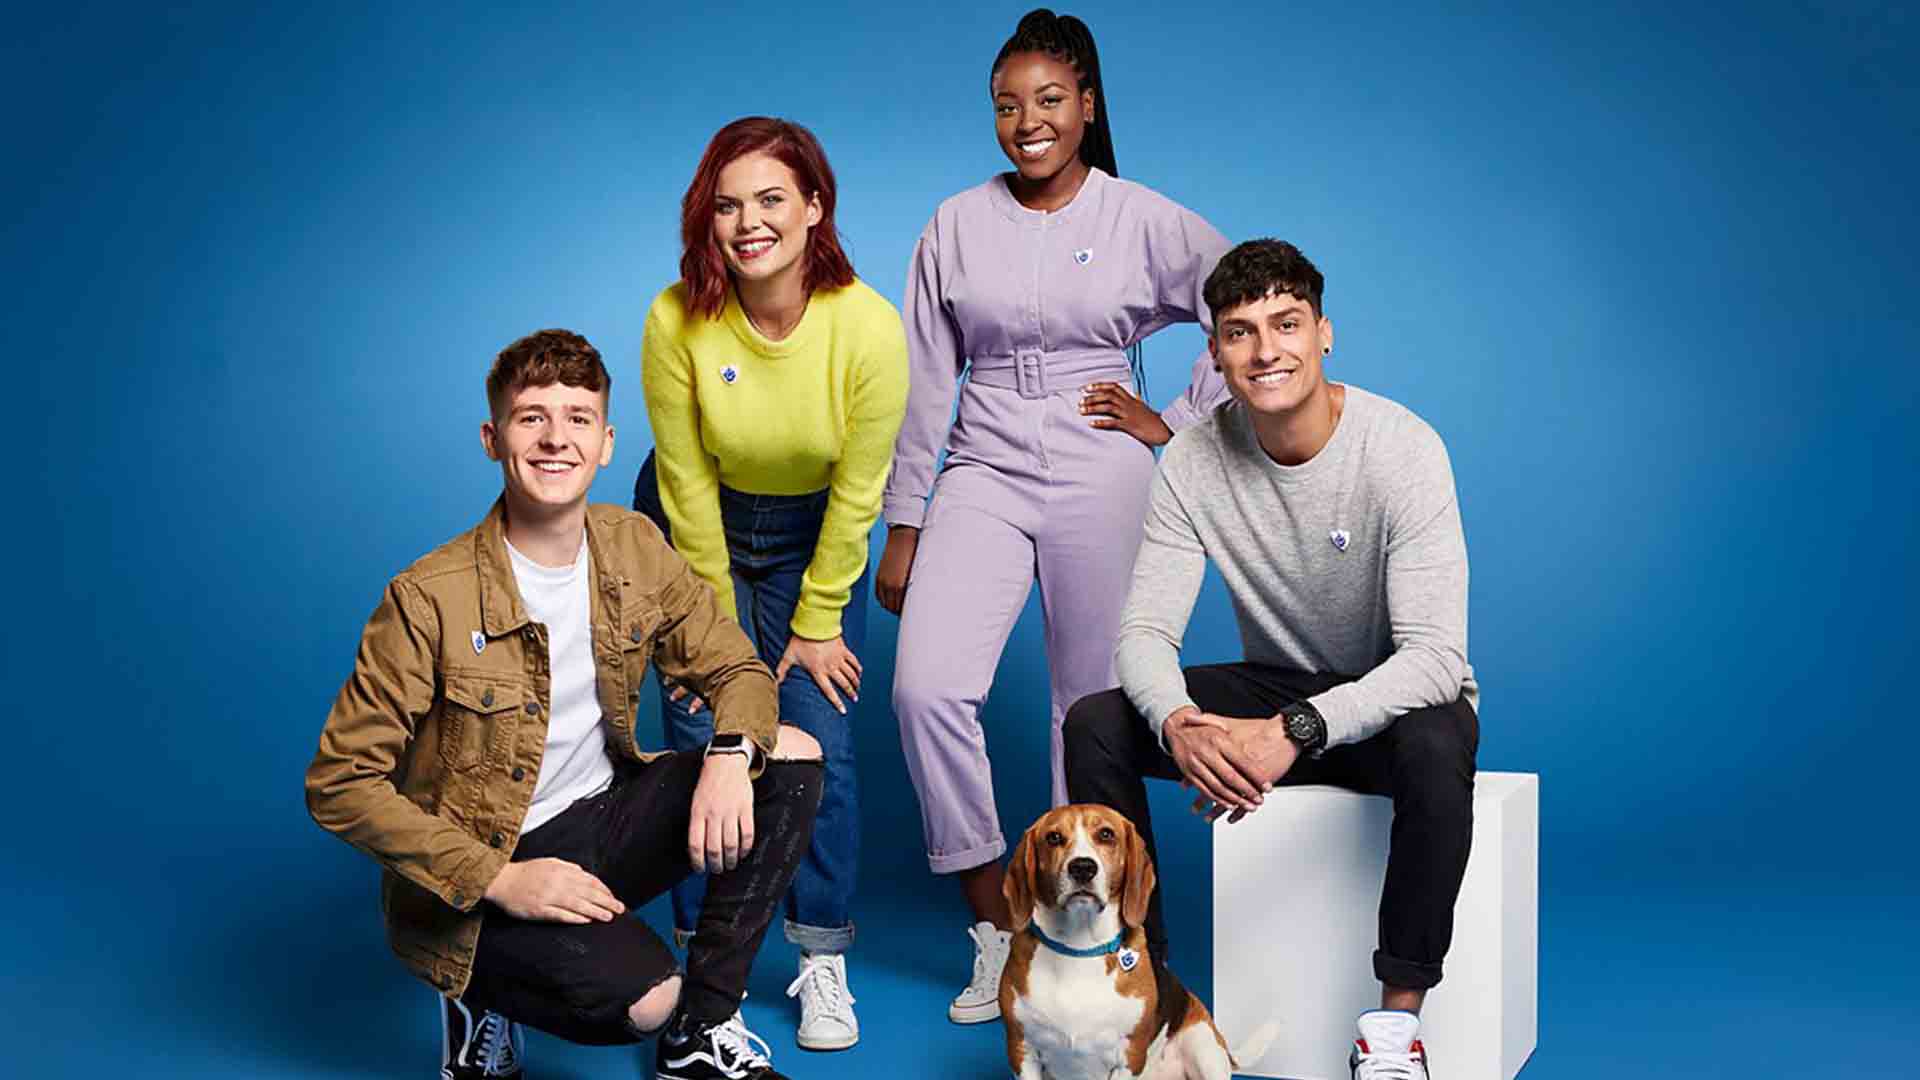 The hosts of the series Blue Peter next to a pet dog